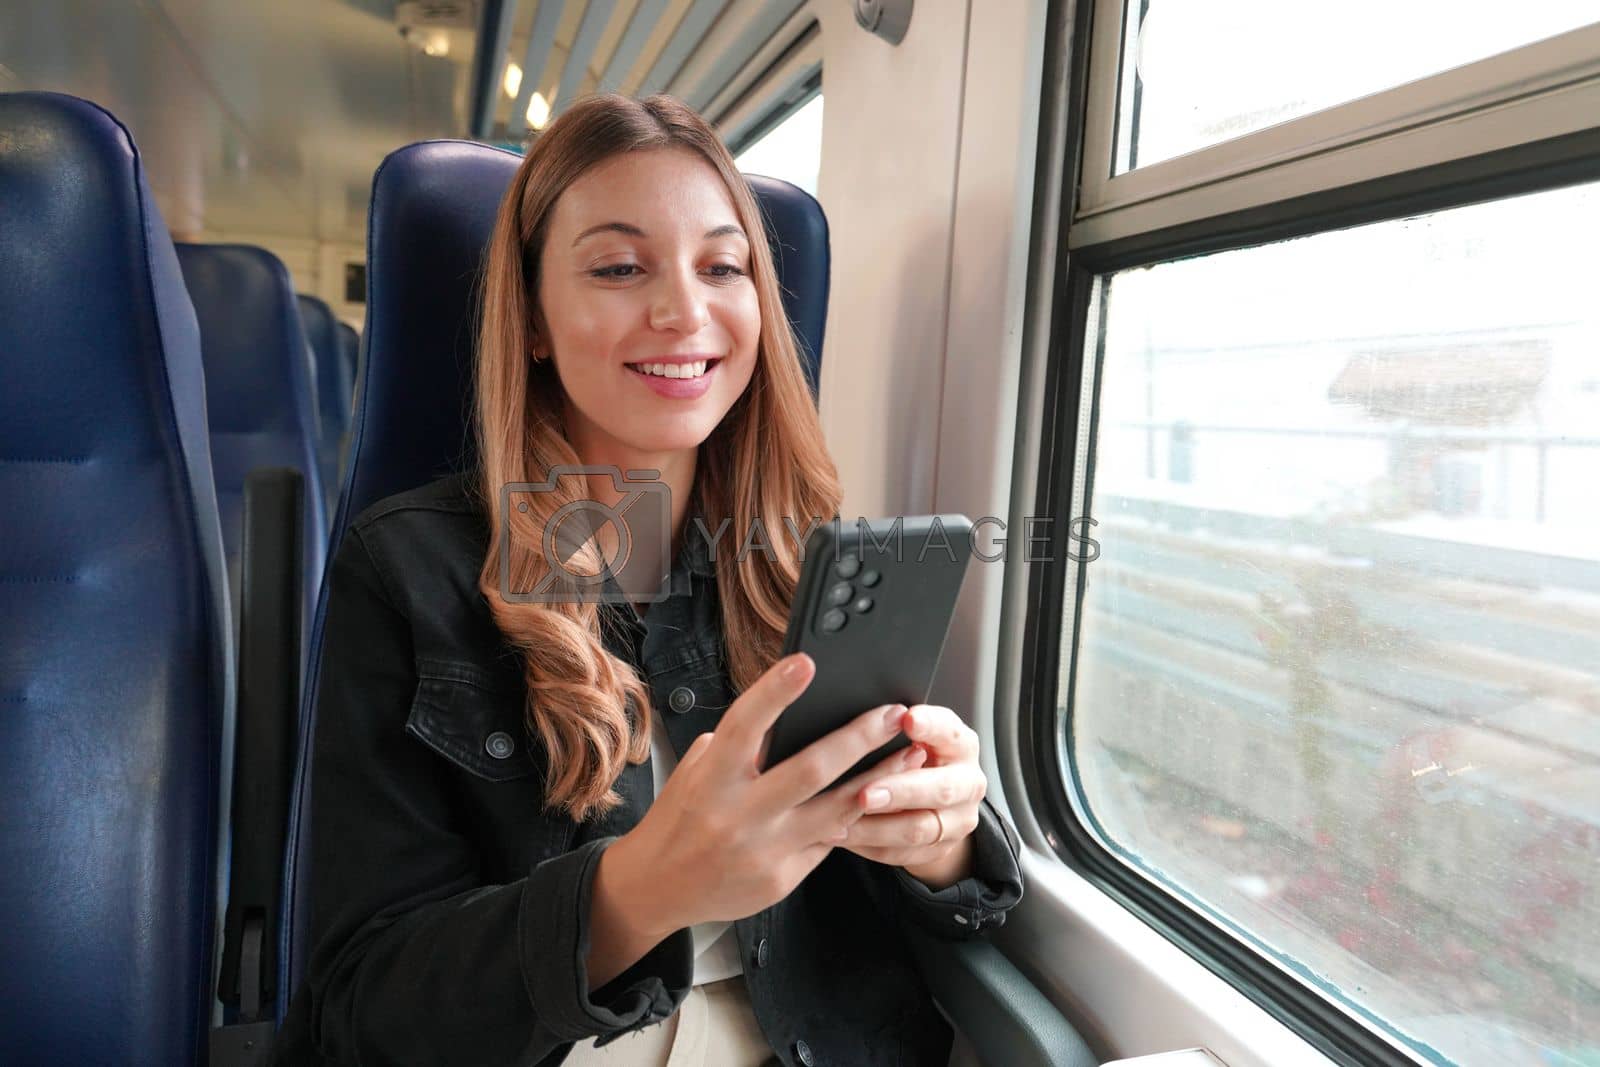 Royalty free image of Young business woman using public transport, sitting with phone on train by sergio_monti